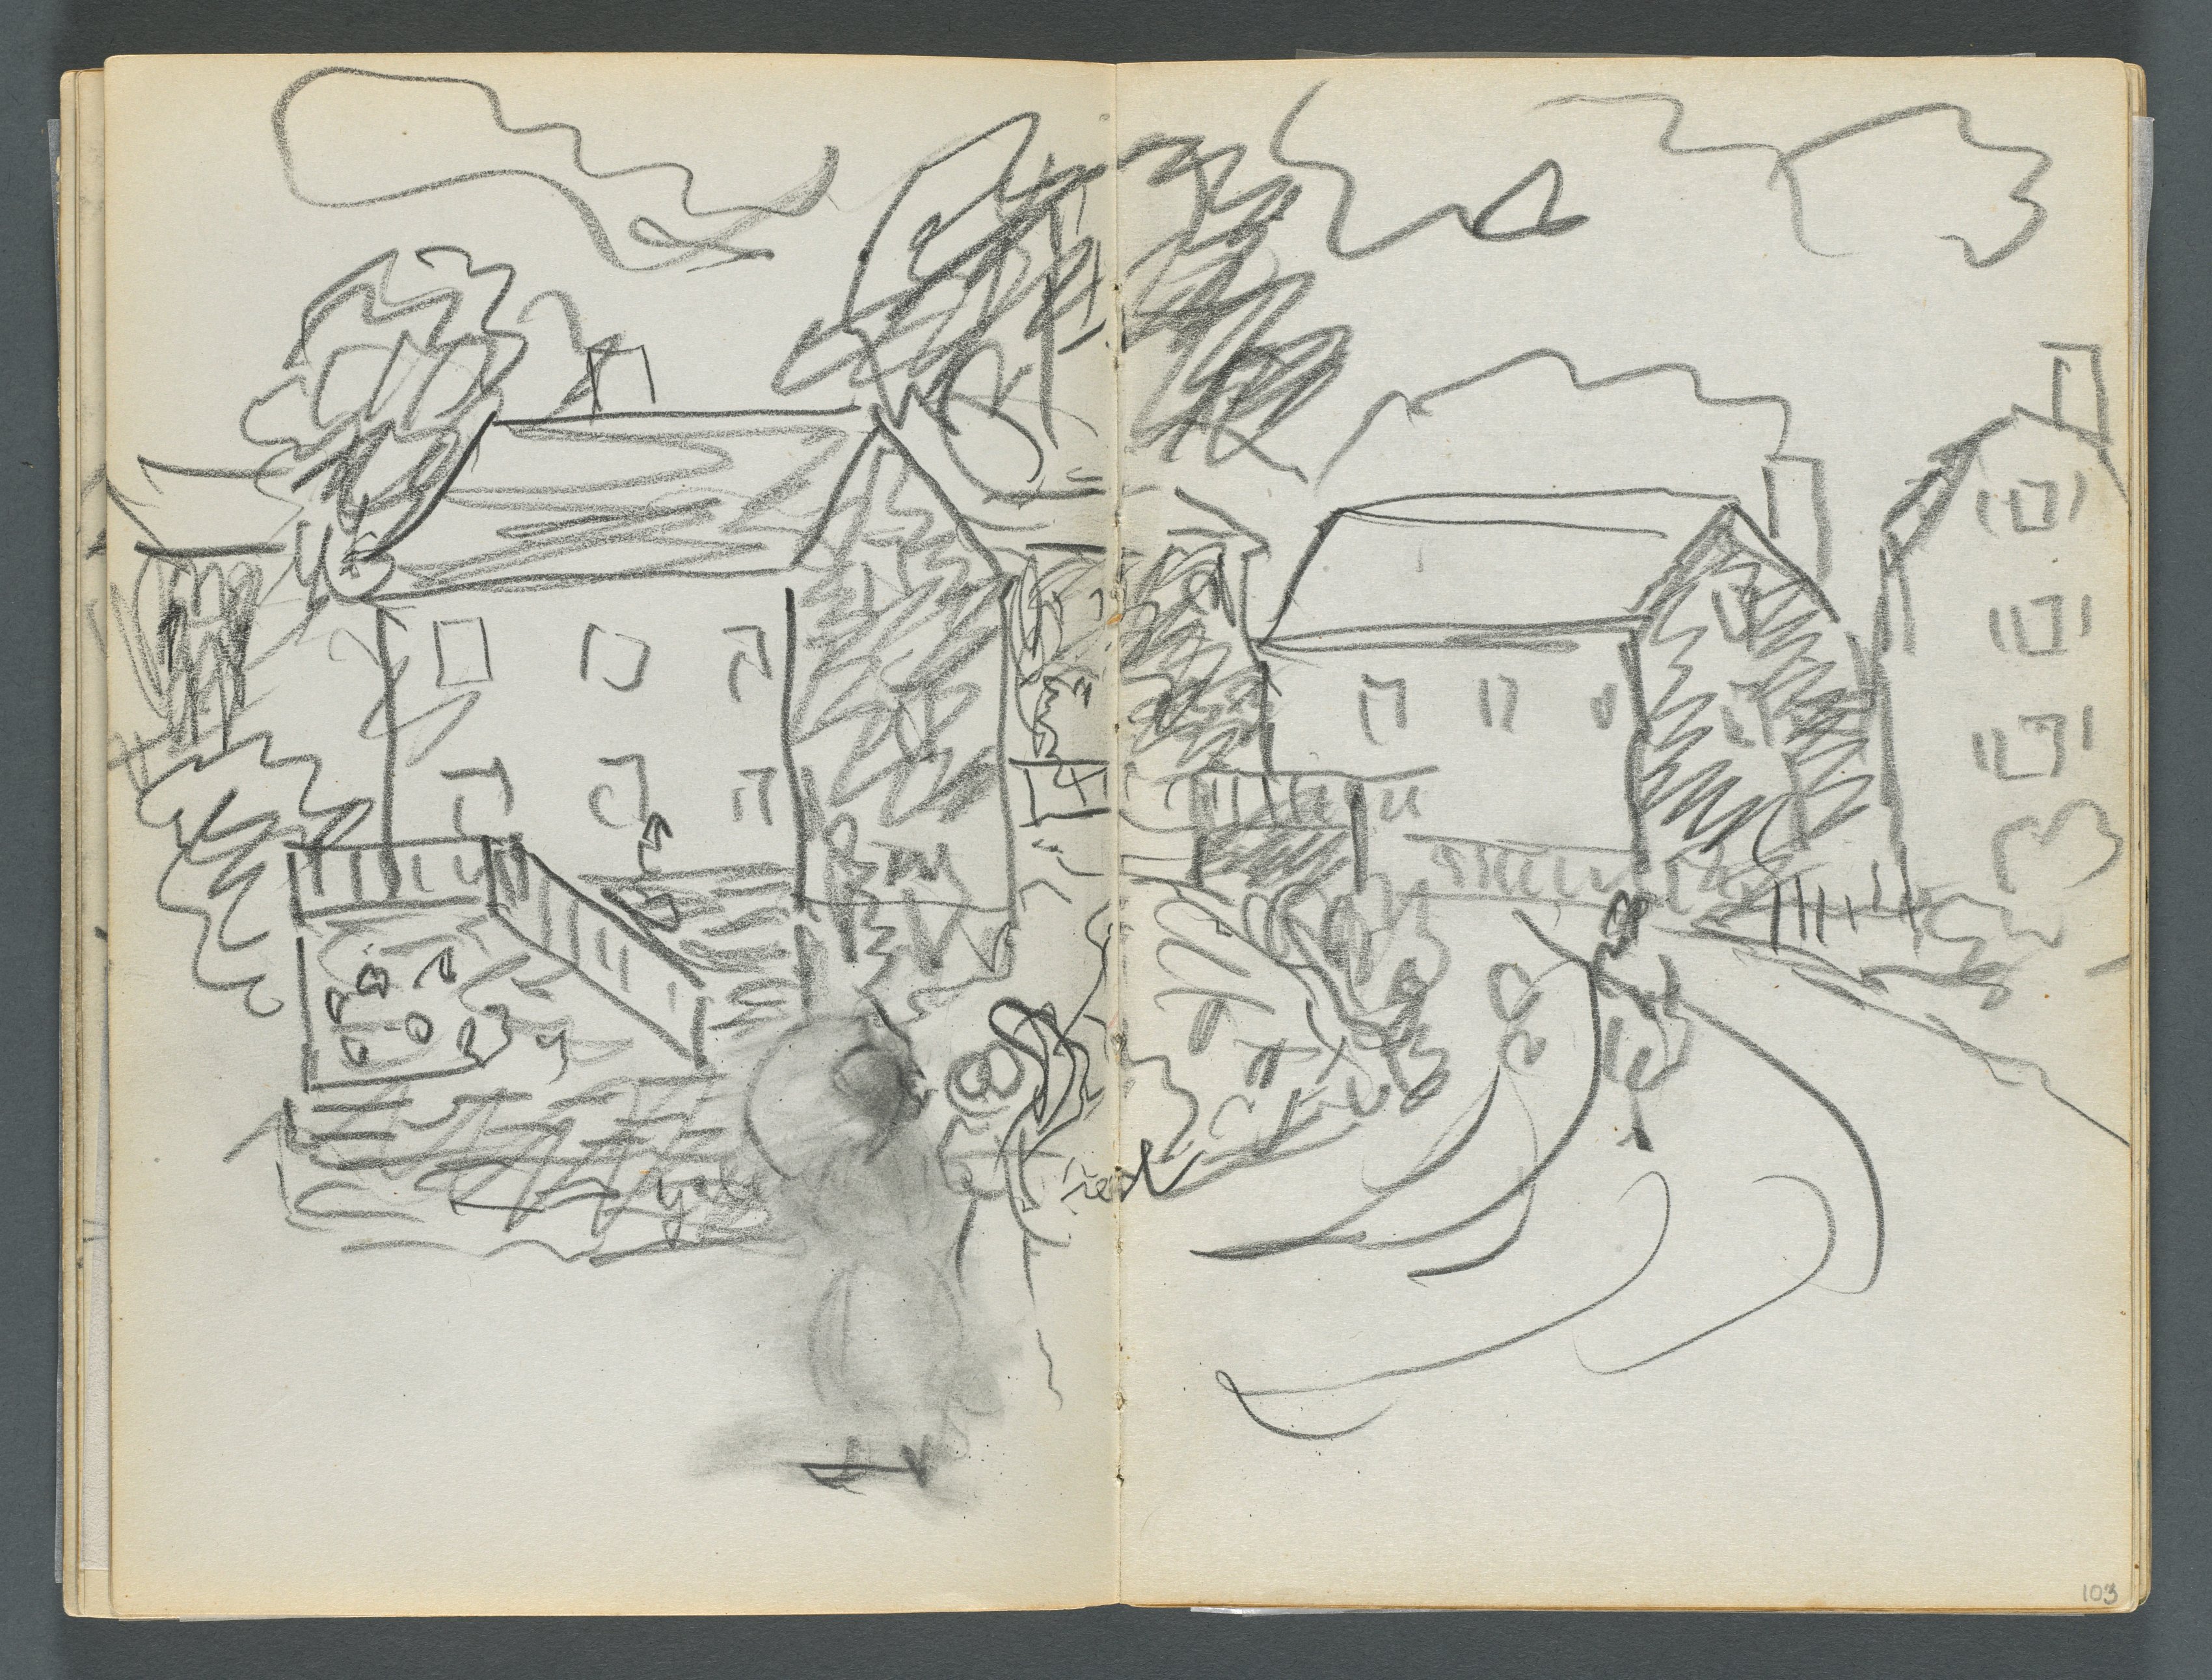 Sketchbook, The Dells, N° 127, page 102 & 103: Landscape with Houses and Road